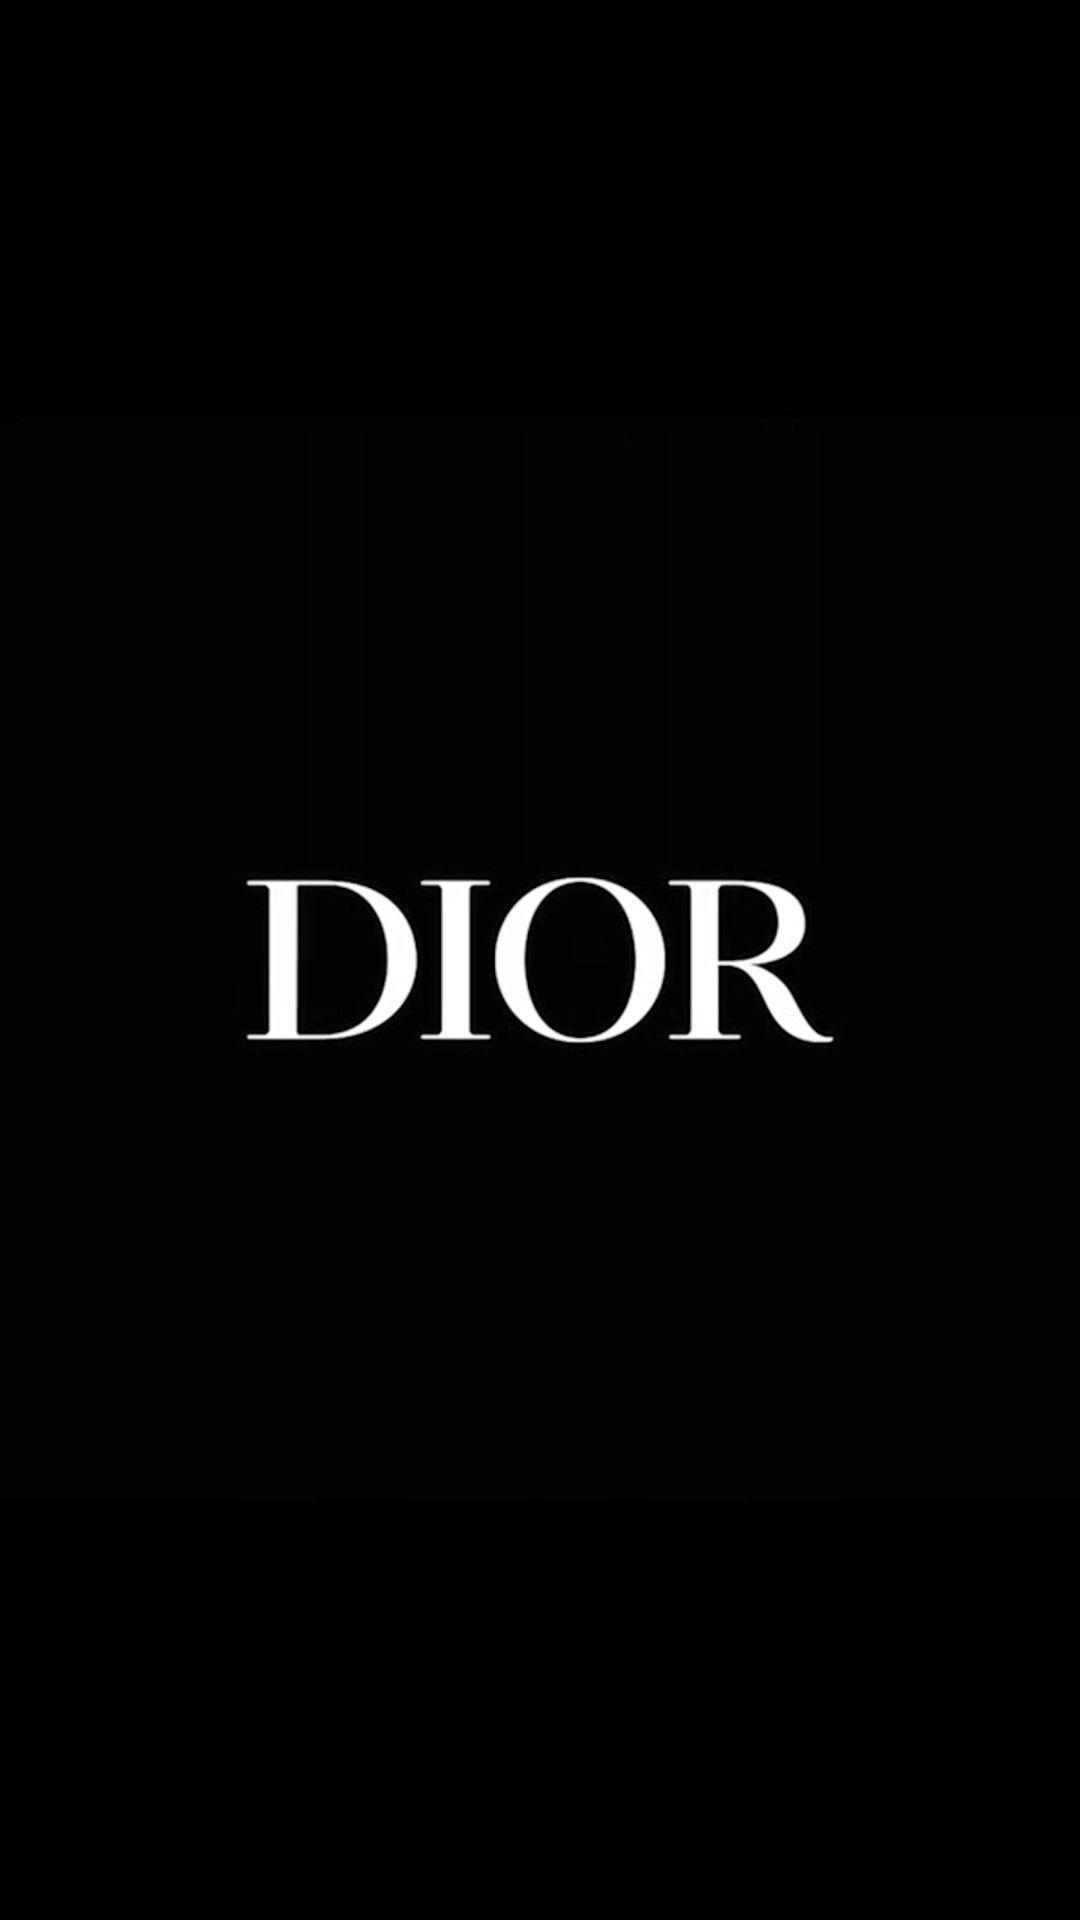 Dior Iphone Wallpapers Top Free Dior Iphone Backgrounds Wallpaperaccess